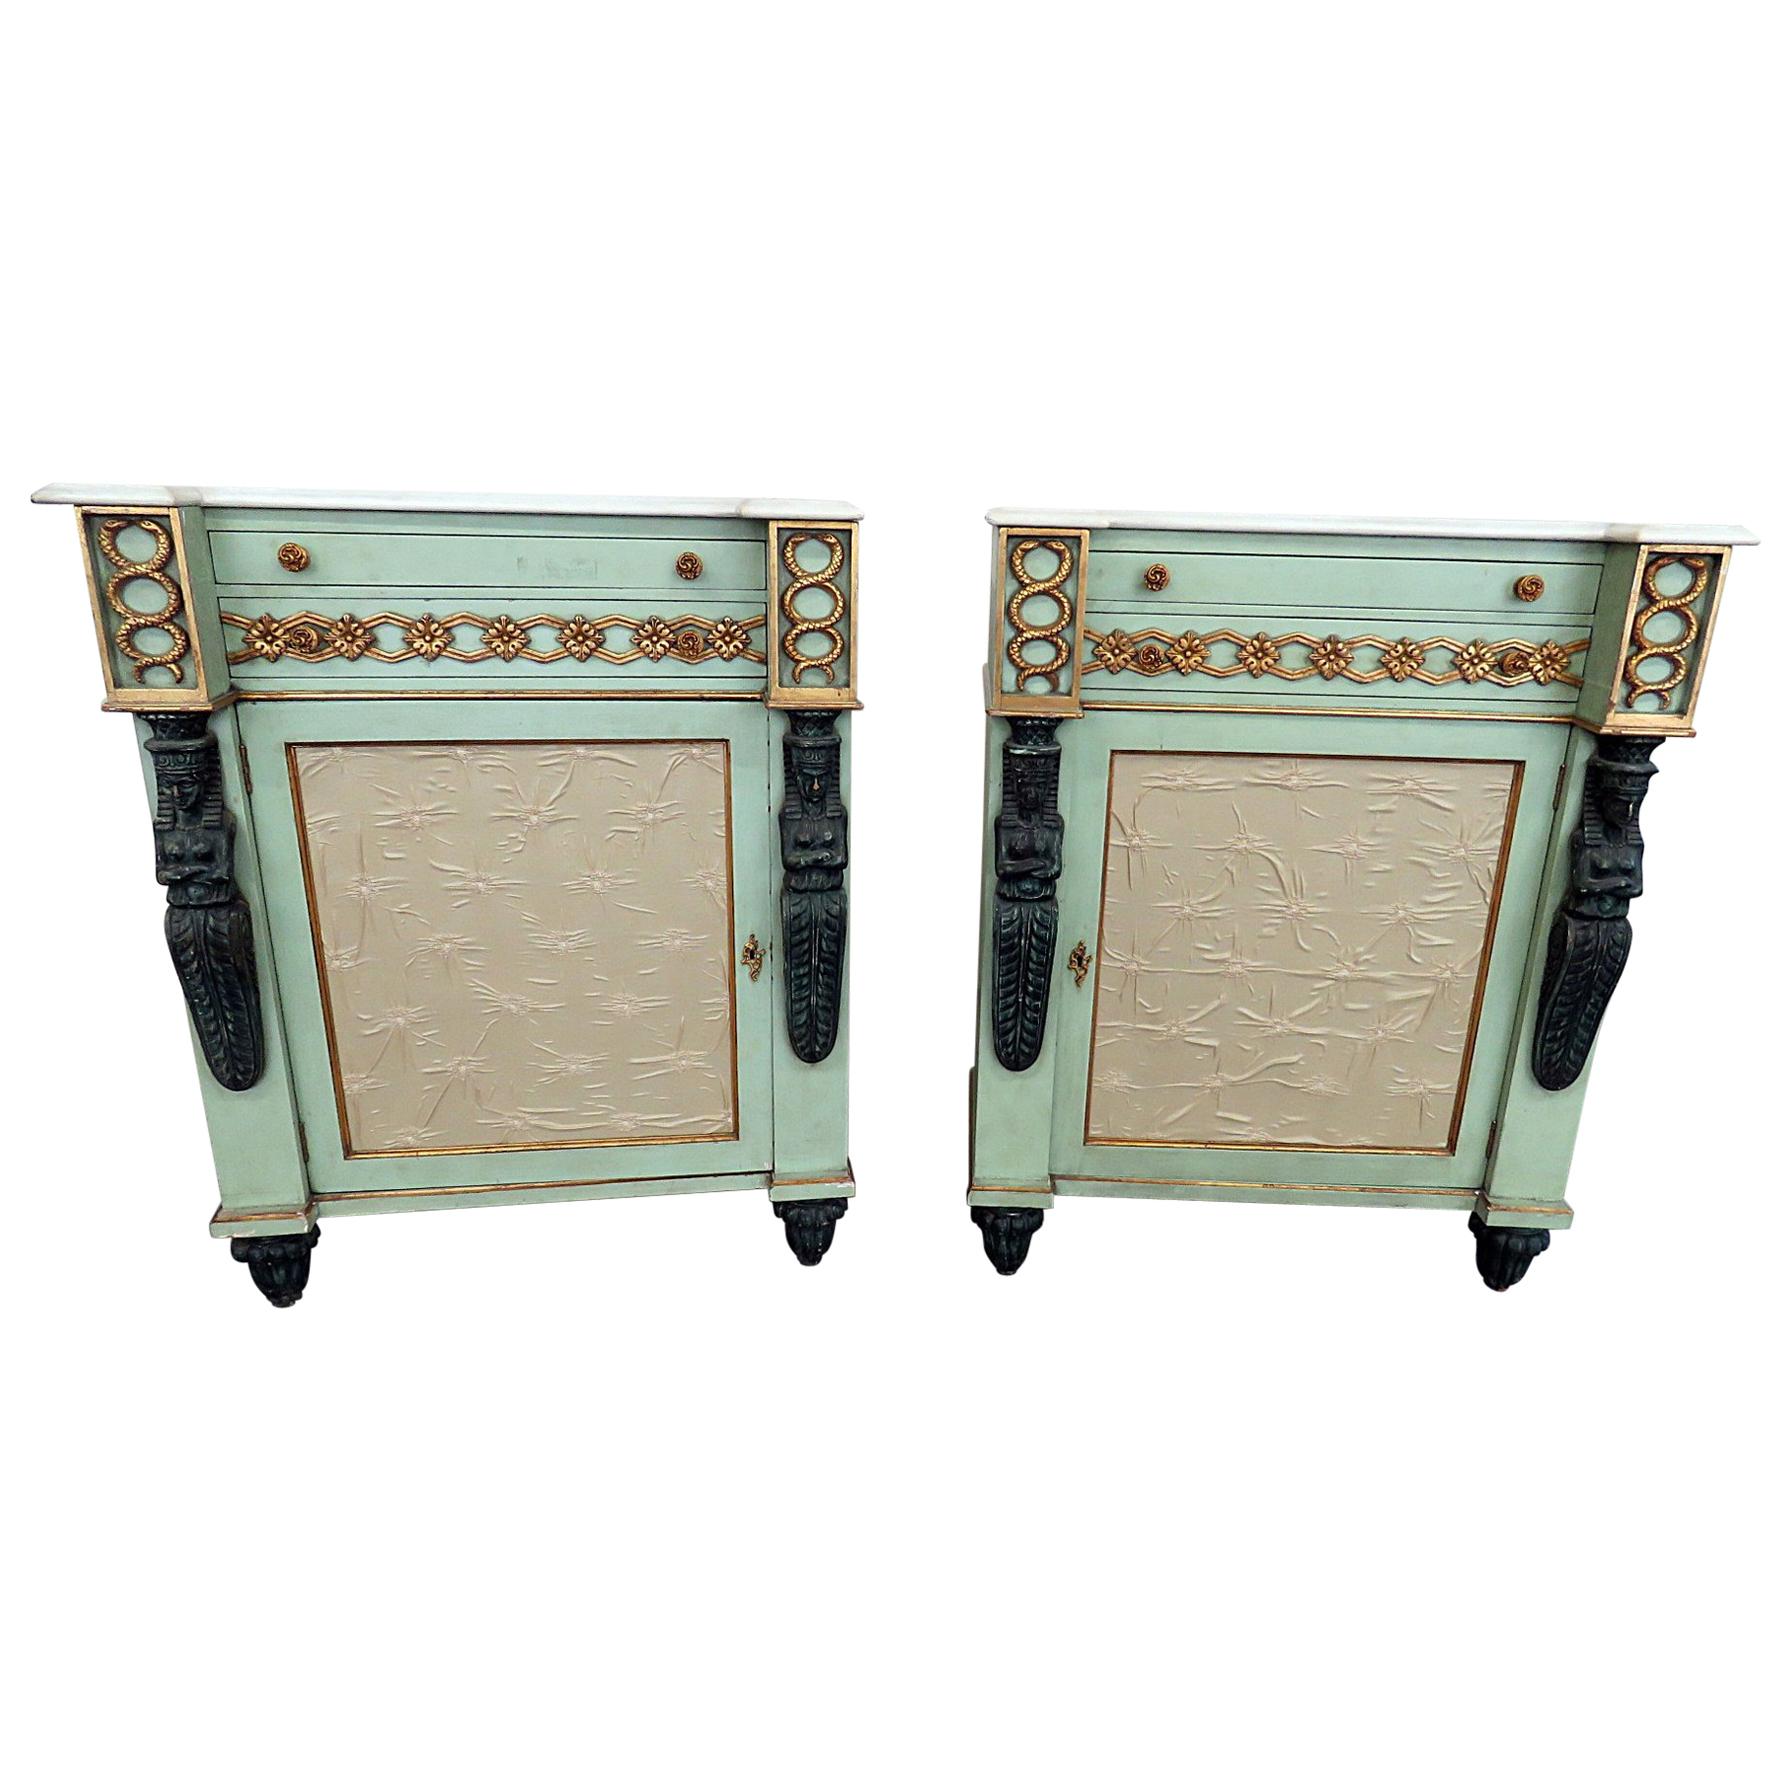 Pair of French Blue Carved Figural Marble-Top Empire Style Commodes Nightstands